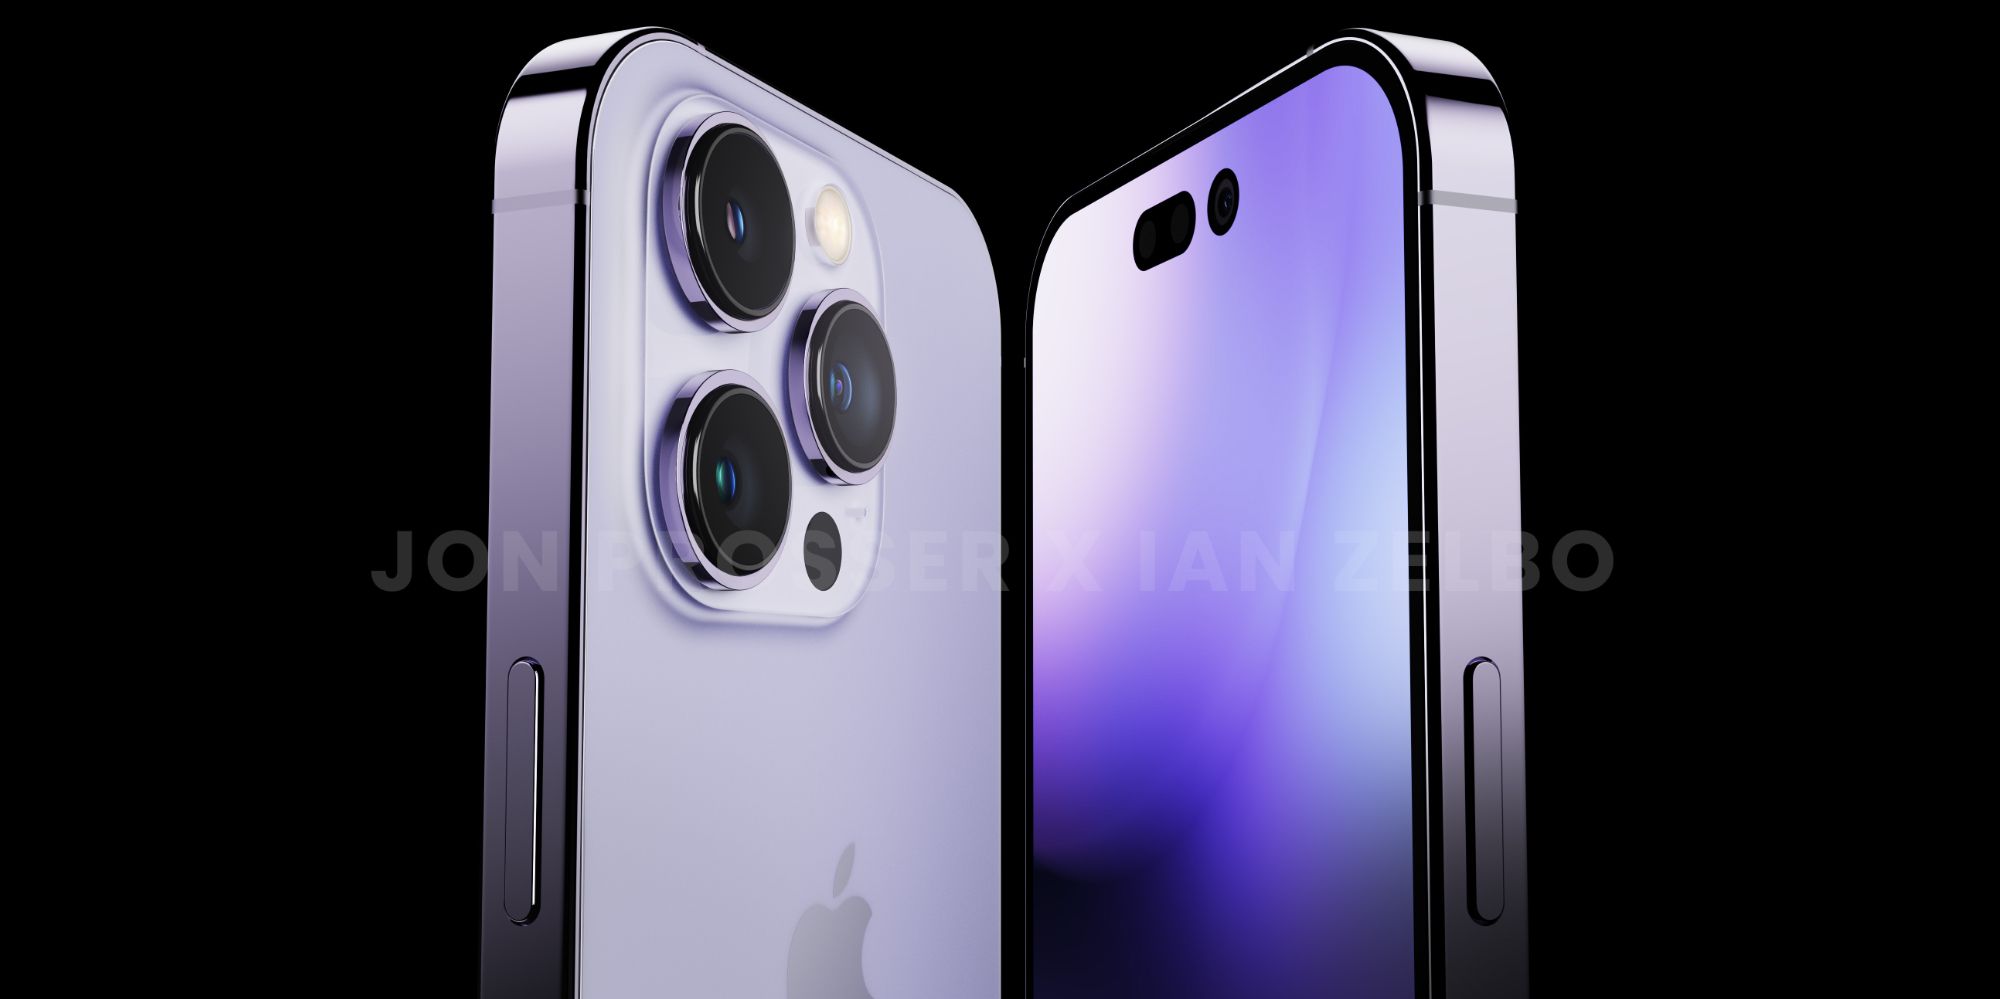 A render of the iPhone 14 Pro